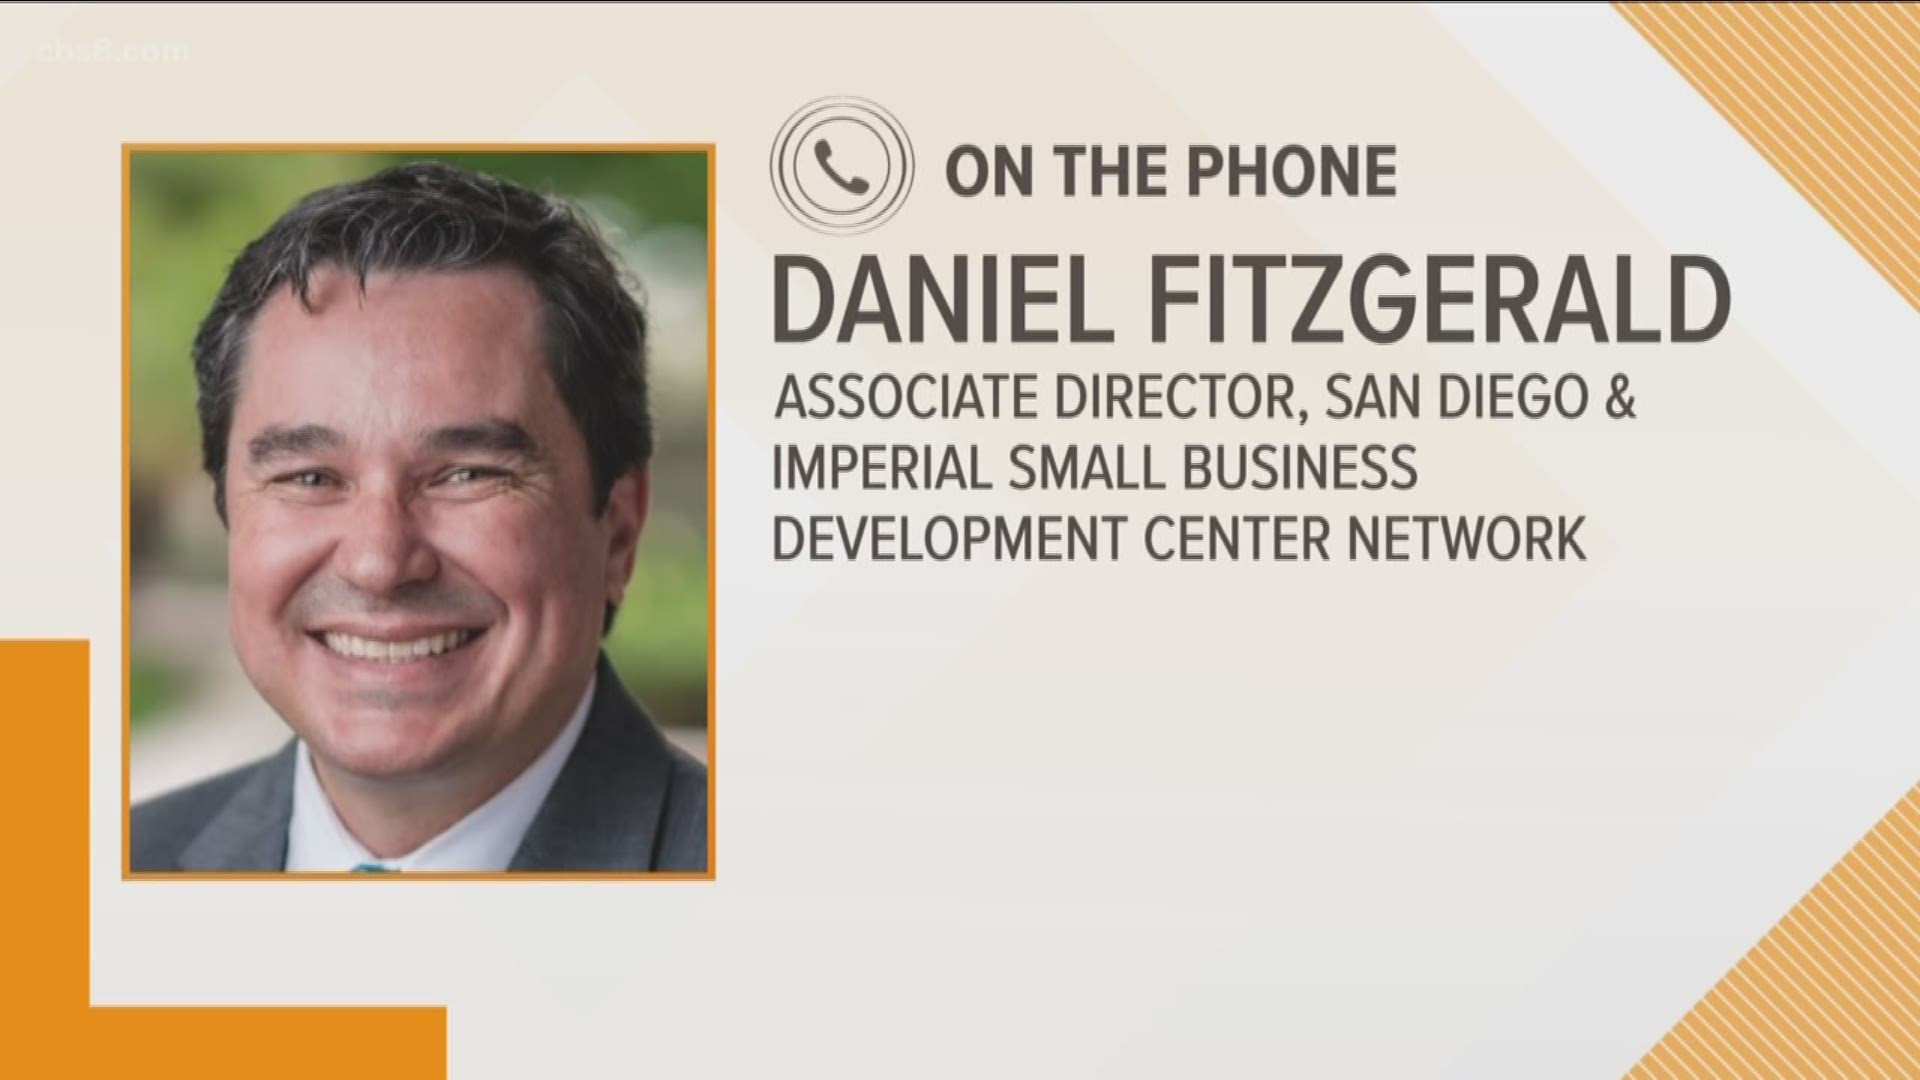 Daniel Fitzgerald from San Diego & Imperial Small Business Development Center Network gave different ideas to help struggling small businesses.